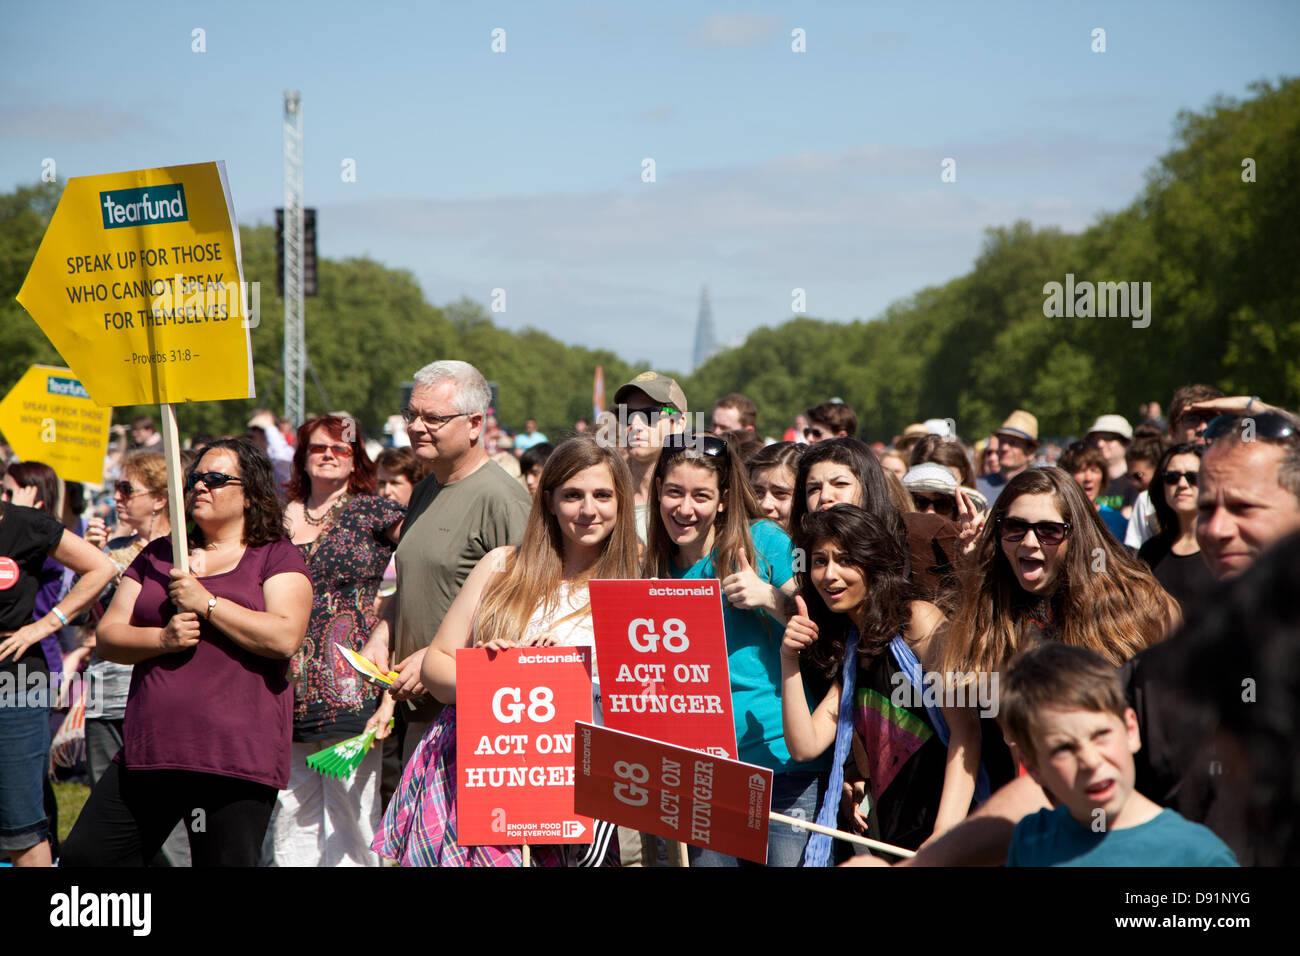 London, UK. Saturday 8th June 2013 “Big IF” event was held in Hyde Park to raise awareness of food poverty ahead of the G8 meeting in Northern Ireland. Thousands attended the event Hosted by Gethin Jones and Myleene Klass, it included speeches by Bill Gates and Danny Boyle. Credit:  nelson pereira/Alamy Live News Stock Photo